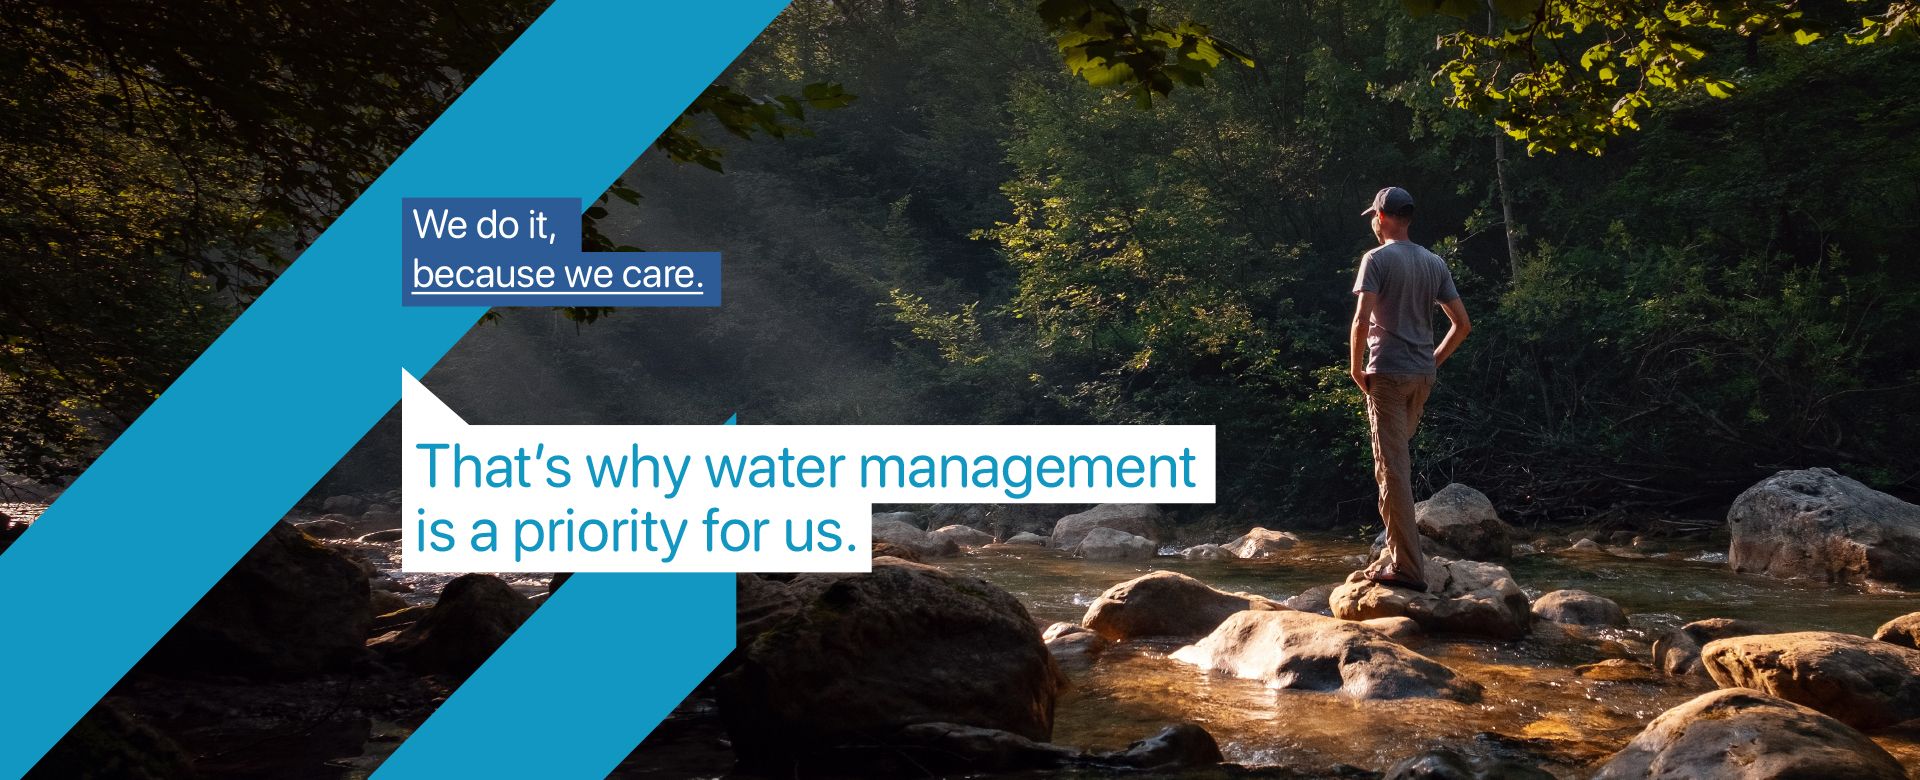 We care for plants, people, and the planet. Therefore, taking care of water is also a commitment.